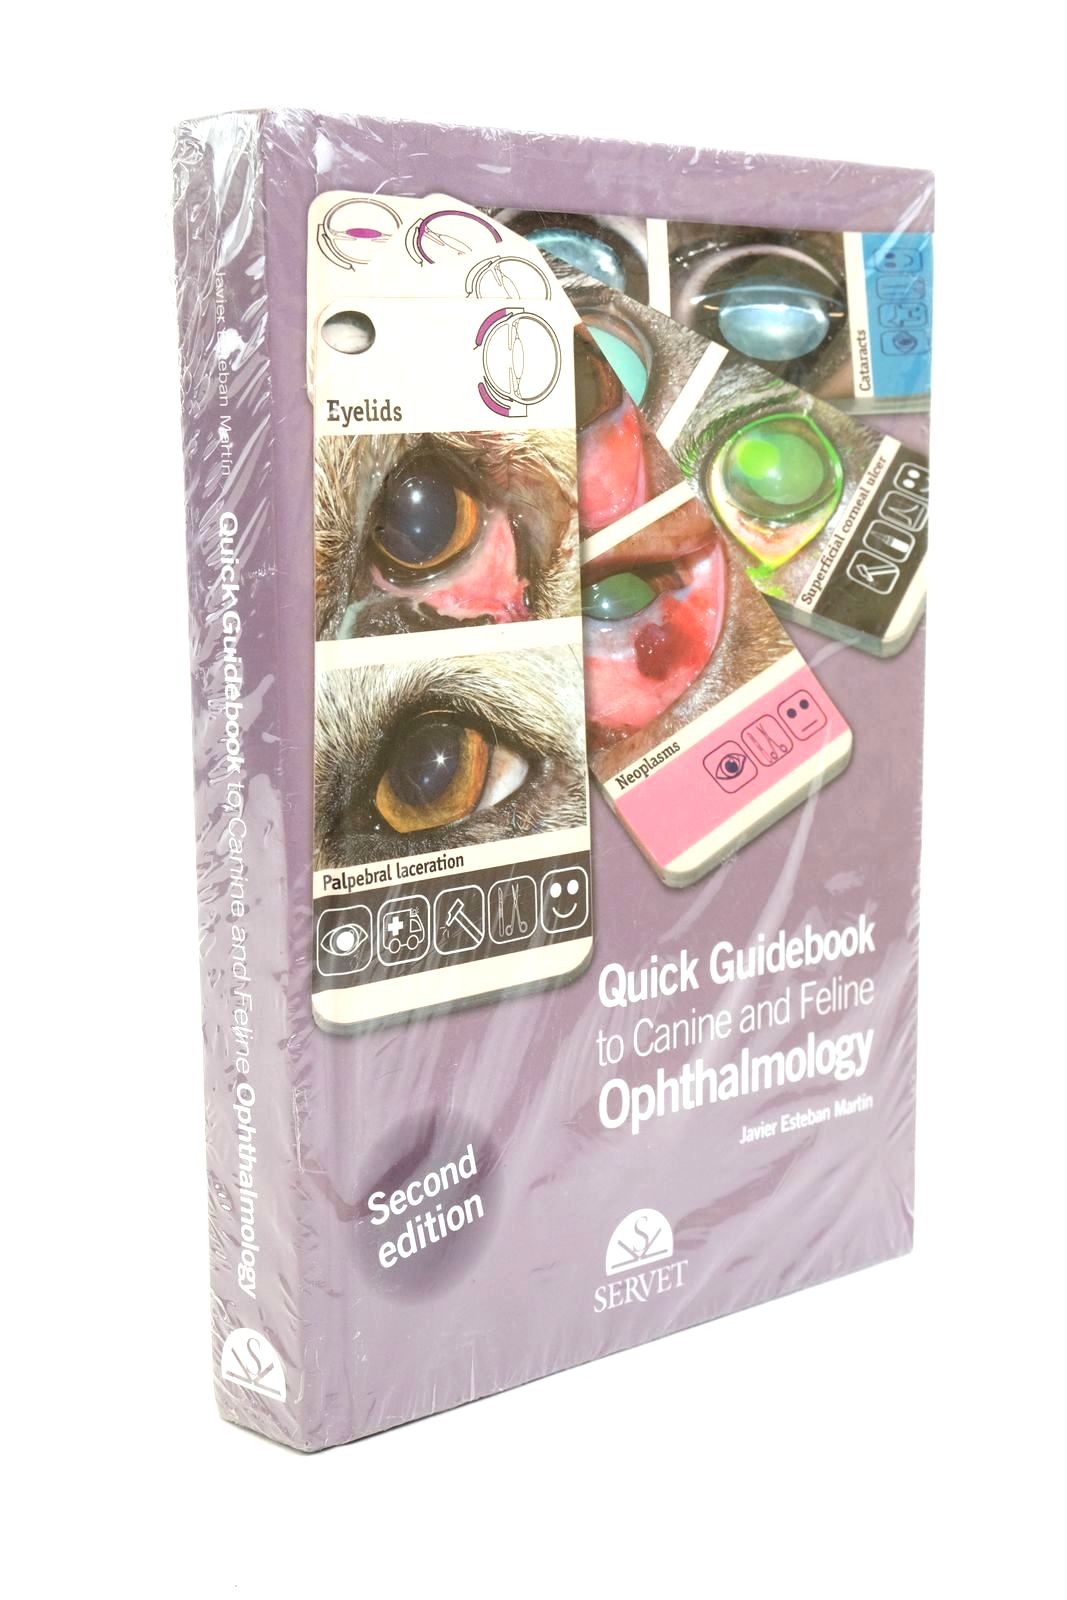 Photo of QUICK GUIDEBOOK TO CANINE AND FELINE OPHTHALMOLOGY written by Martin, Javier Esteban published by Servet (STOCK CODE: 1323097)  for sale by Stella & Rose's Books